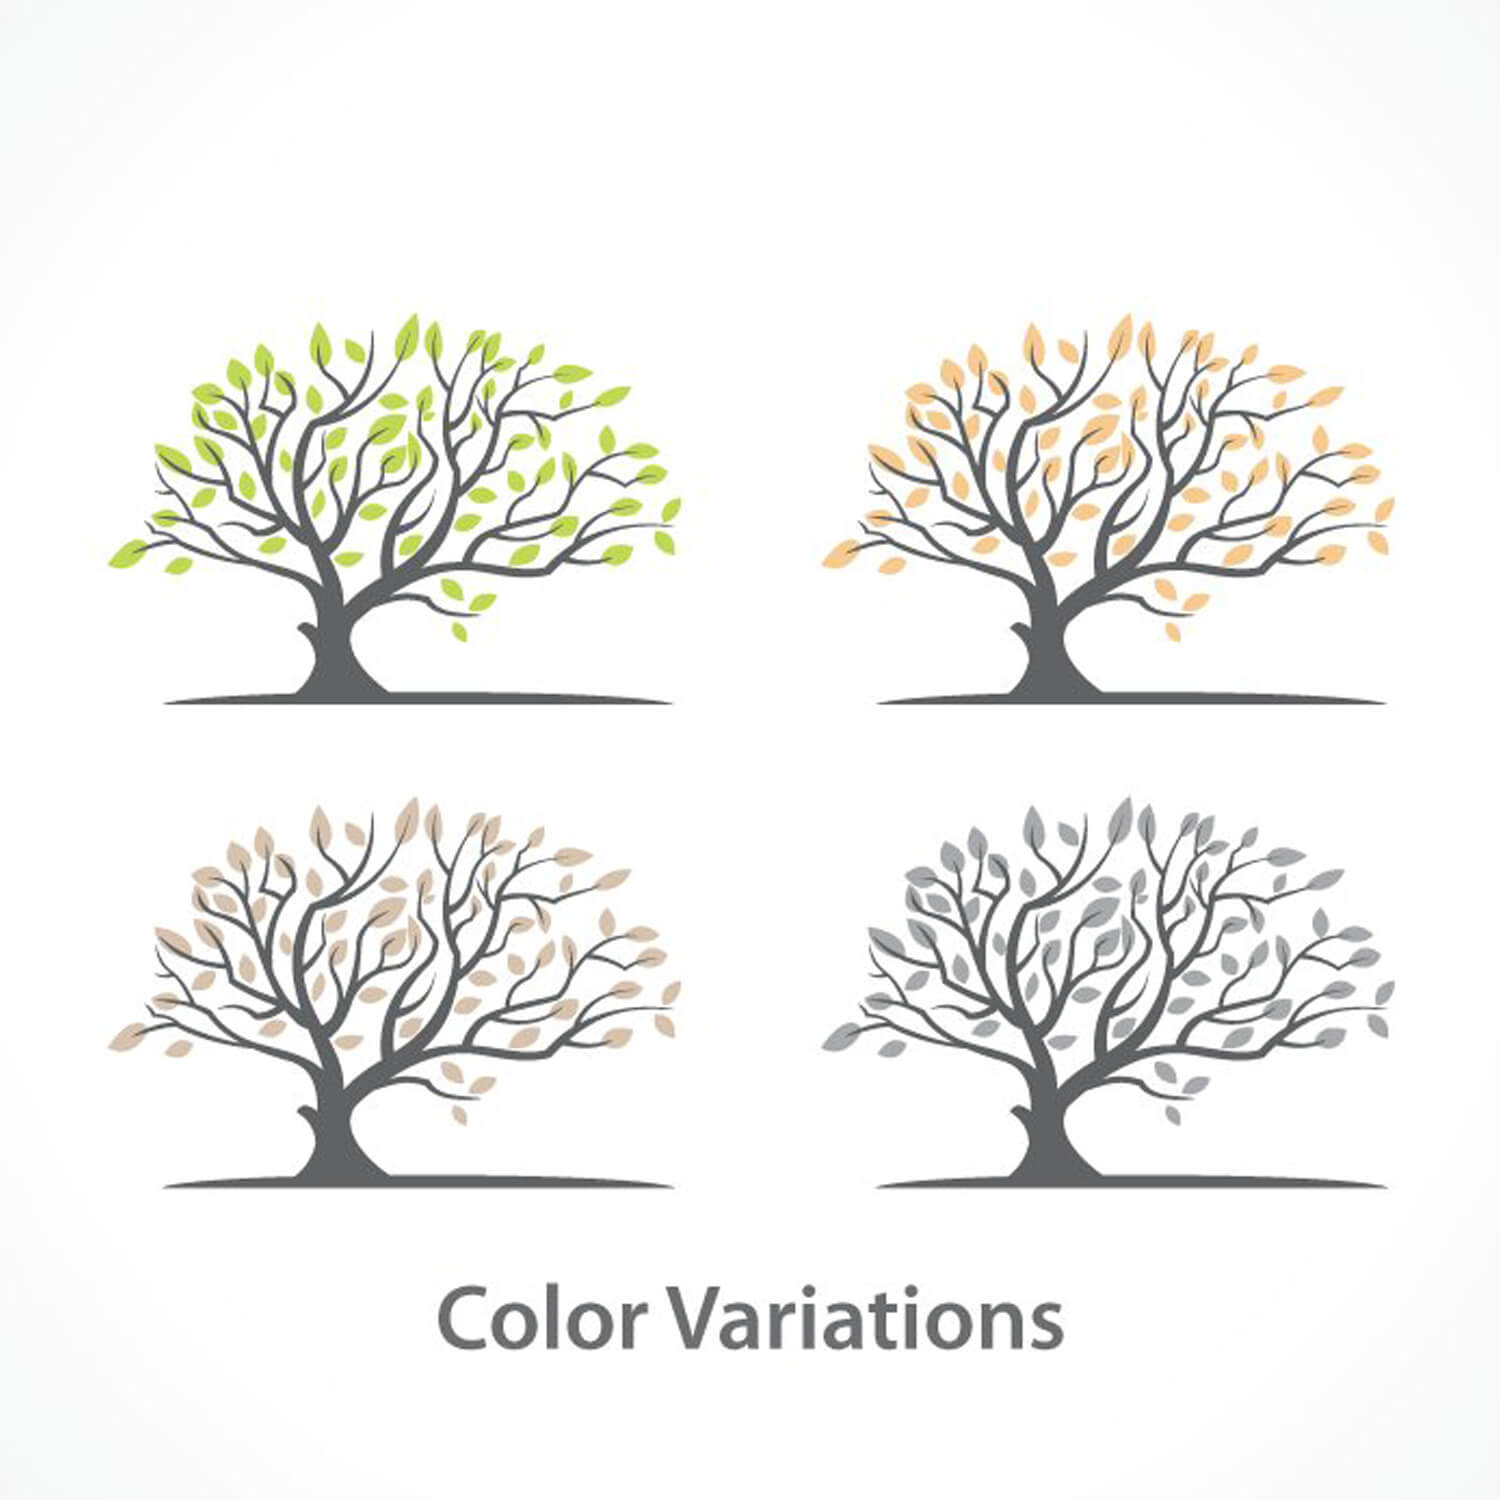 Variants of colored leaves on four drawings of trees in gray on a white background.